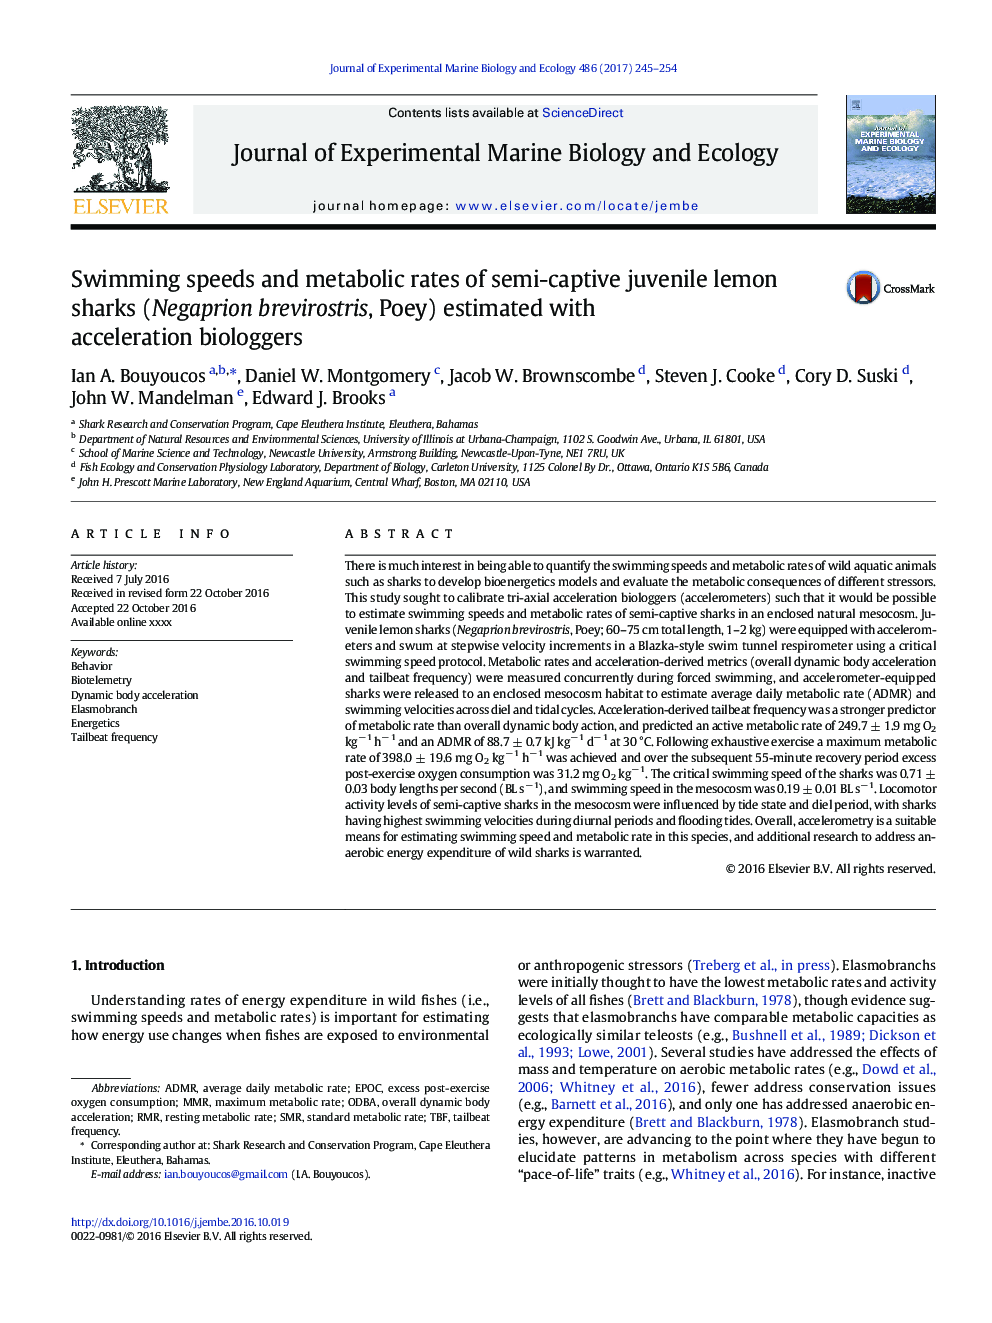 Swimming speeds and metabolic rates of semi-captive juvenile lemon sharks (Negaprion brevirostris, Poey) estimated with acceleration biologgers